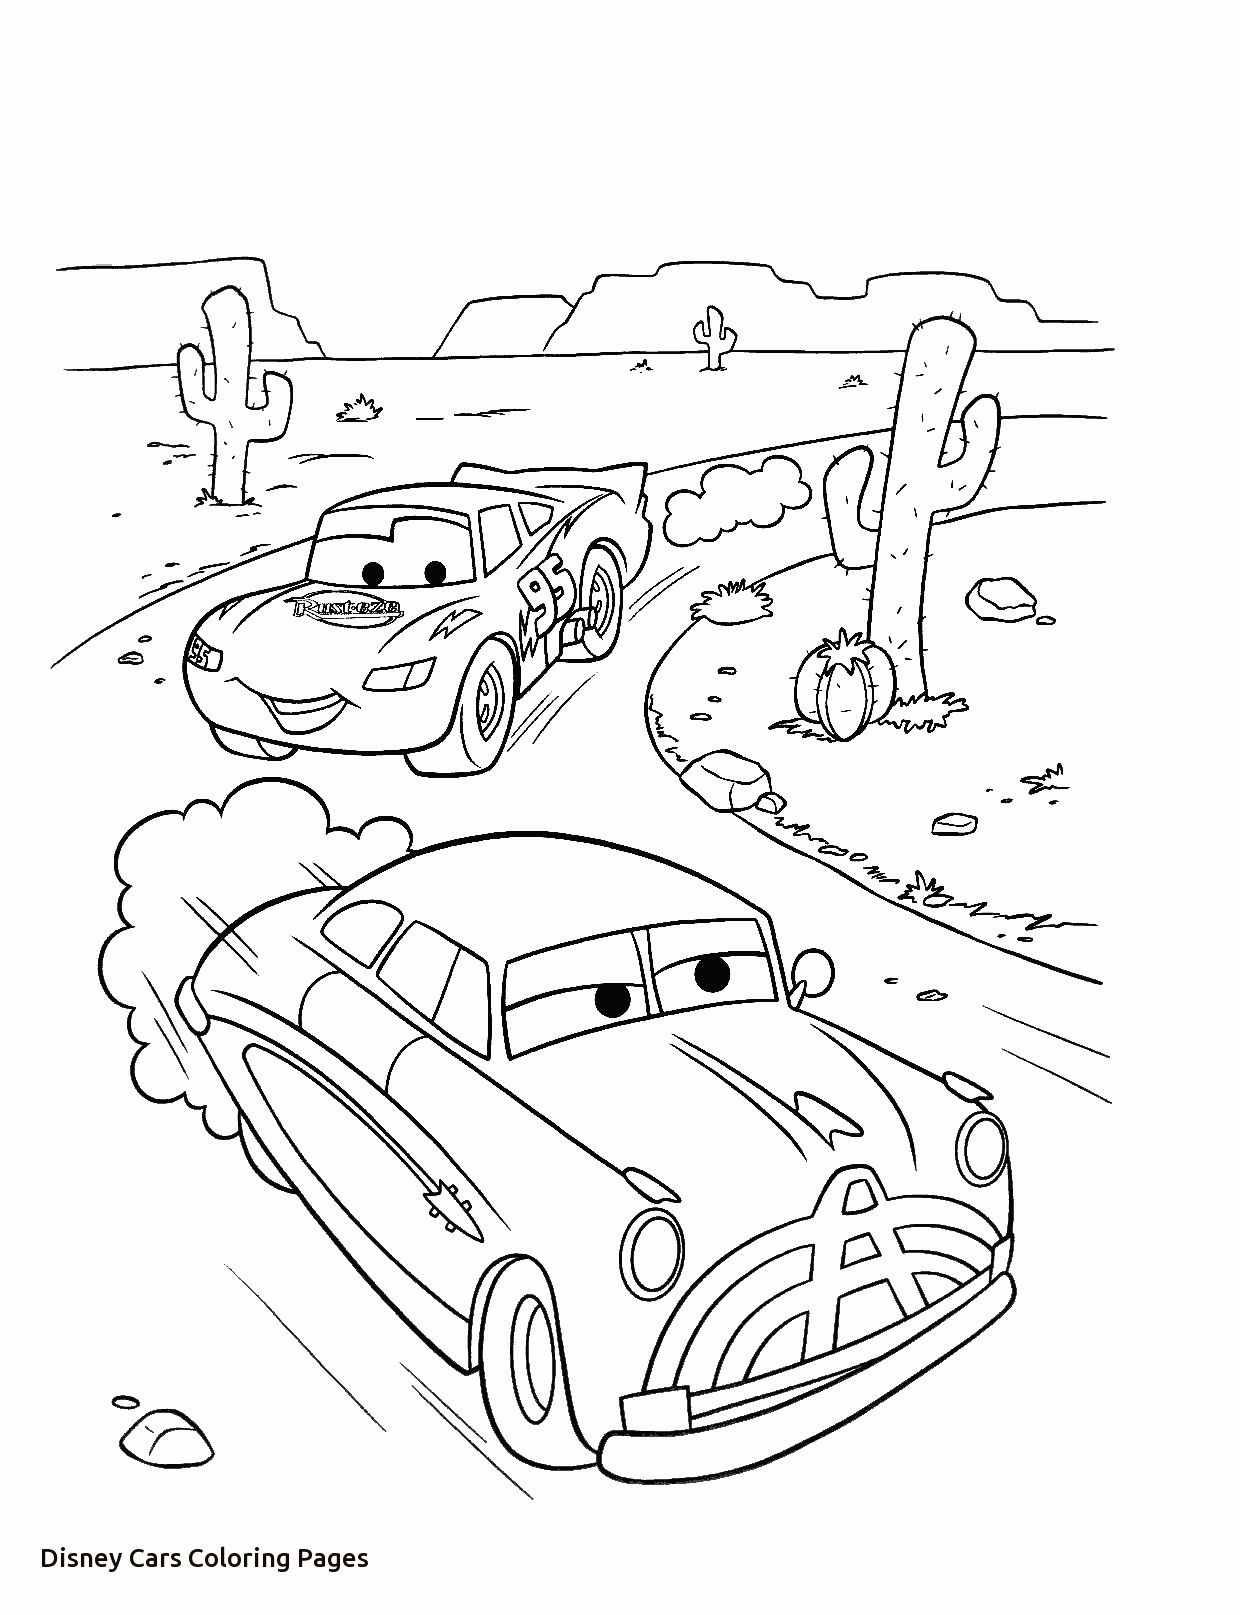 Drag Car Coloring Pages Drag Car Coloring Pages Best Of Racing Cars Coloring Pages Fresh